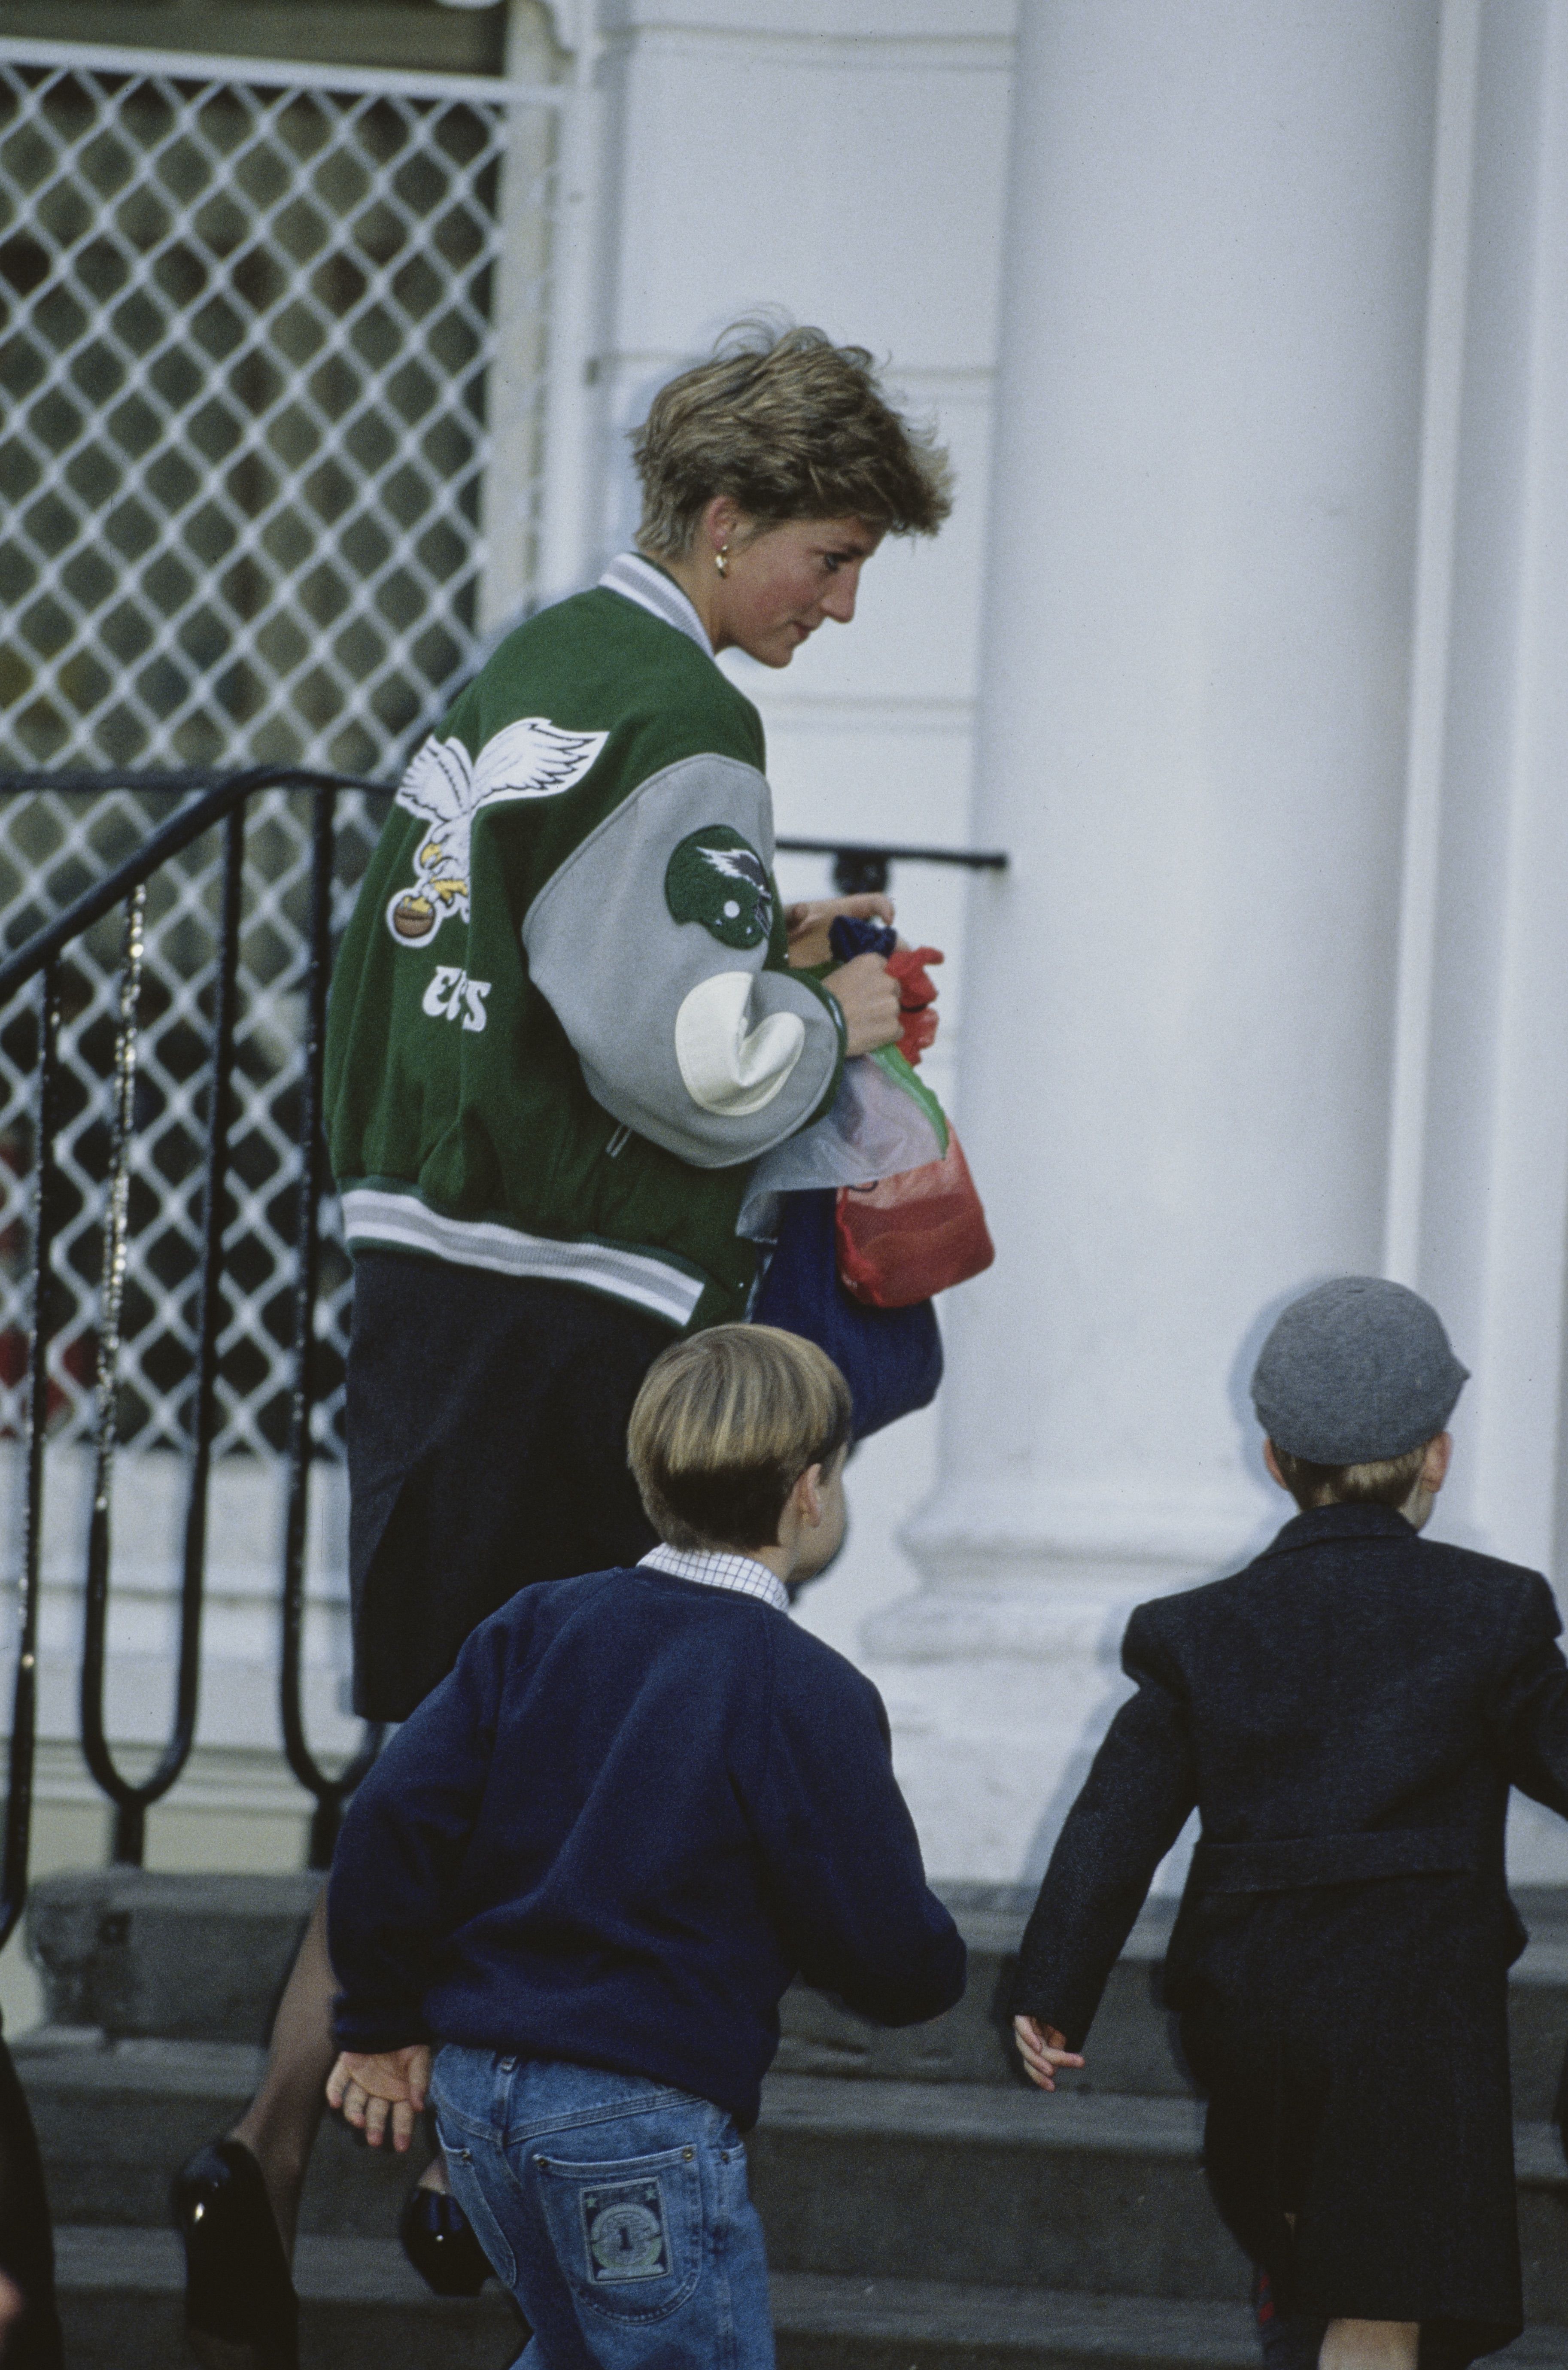 How Princess Diana, Honorary Eagles Fan, Got Her Iconic Jacket